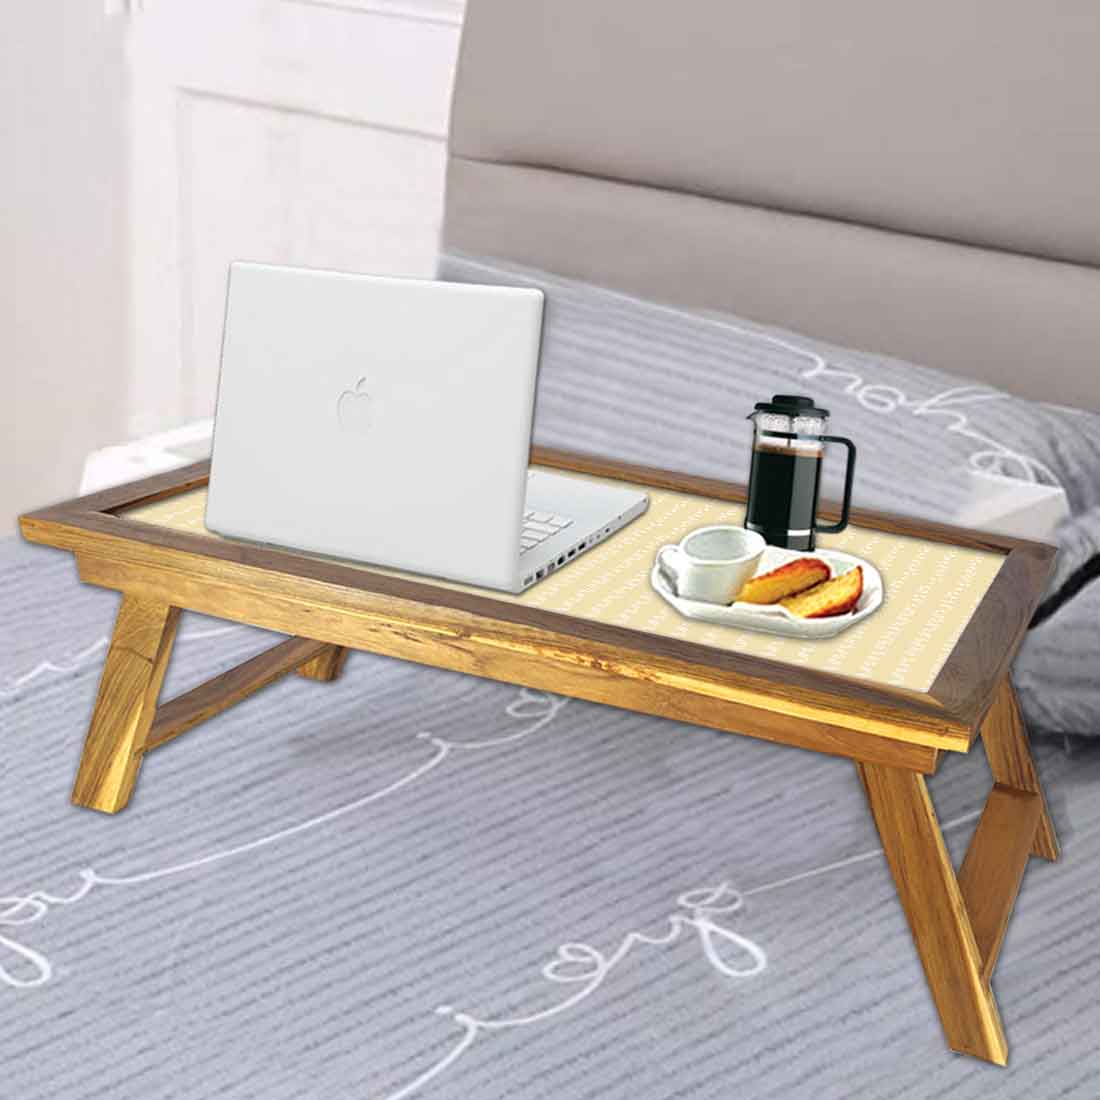 Foldable Bed Table for Bedroom Breakfast Tables Study Desk - Yellow Shade Nutcase